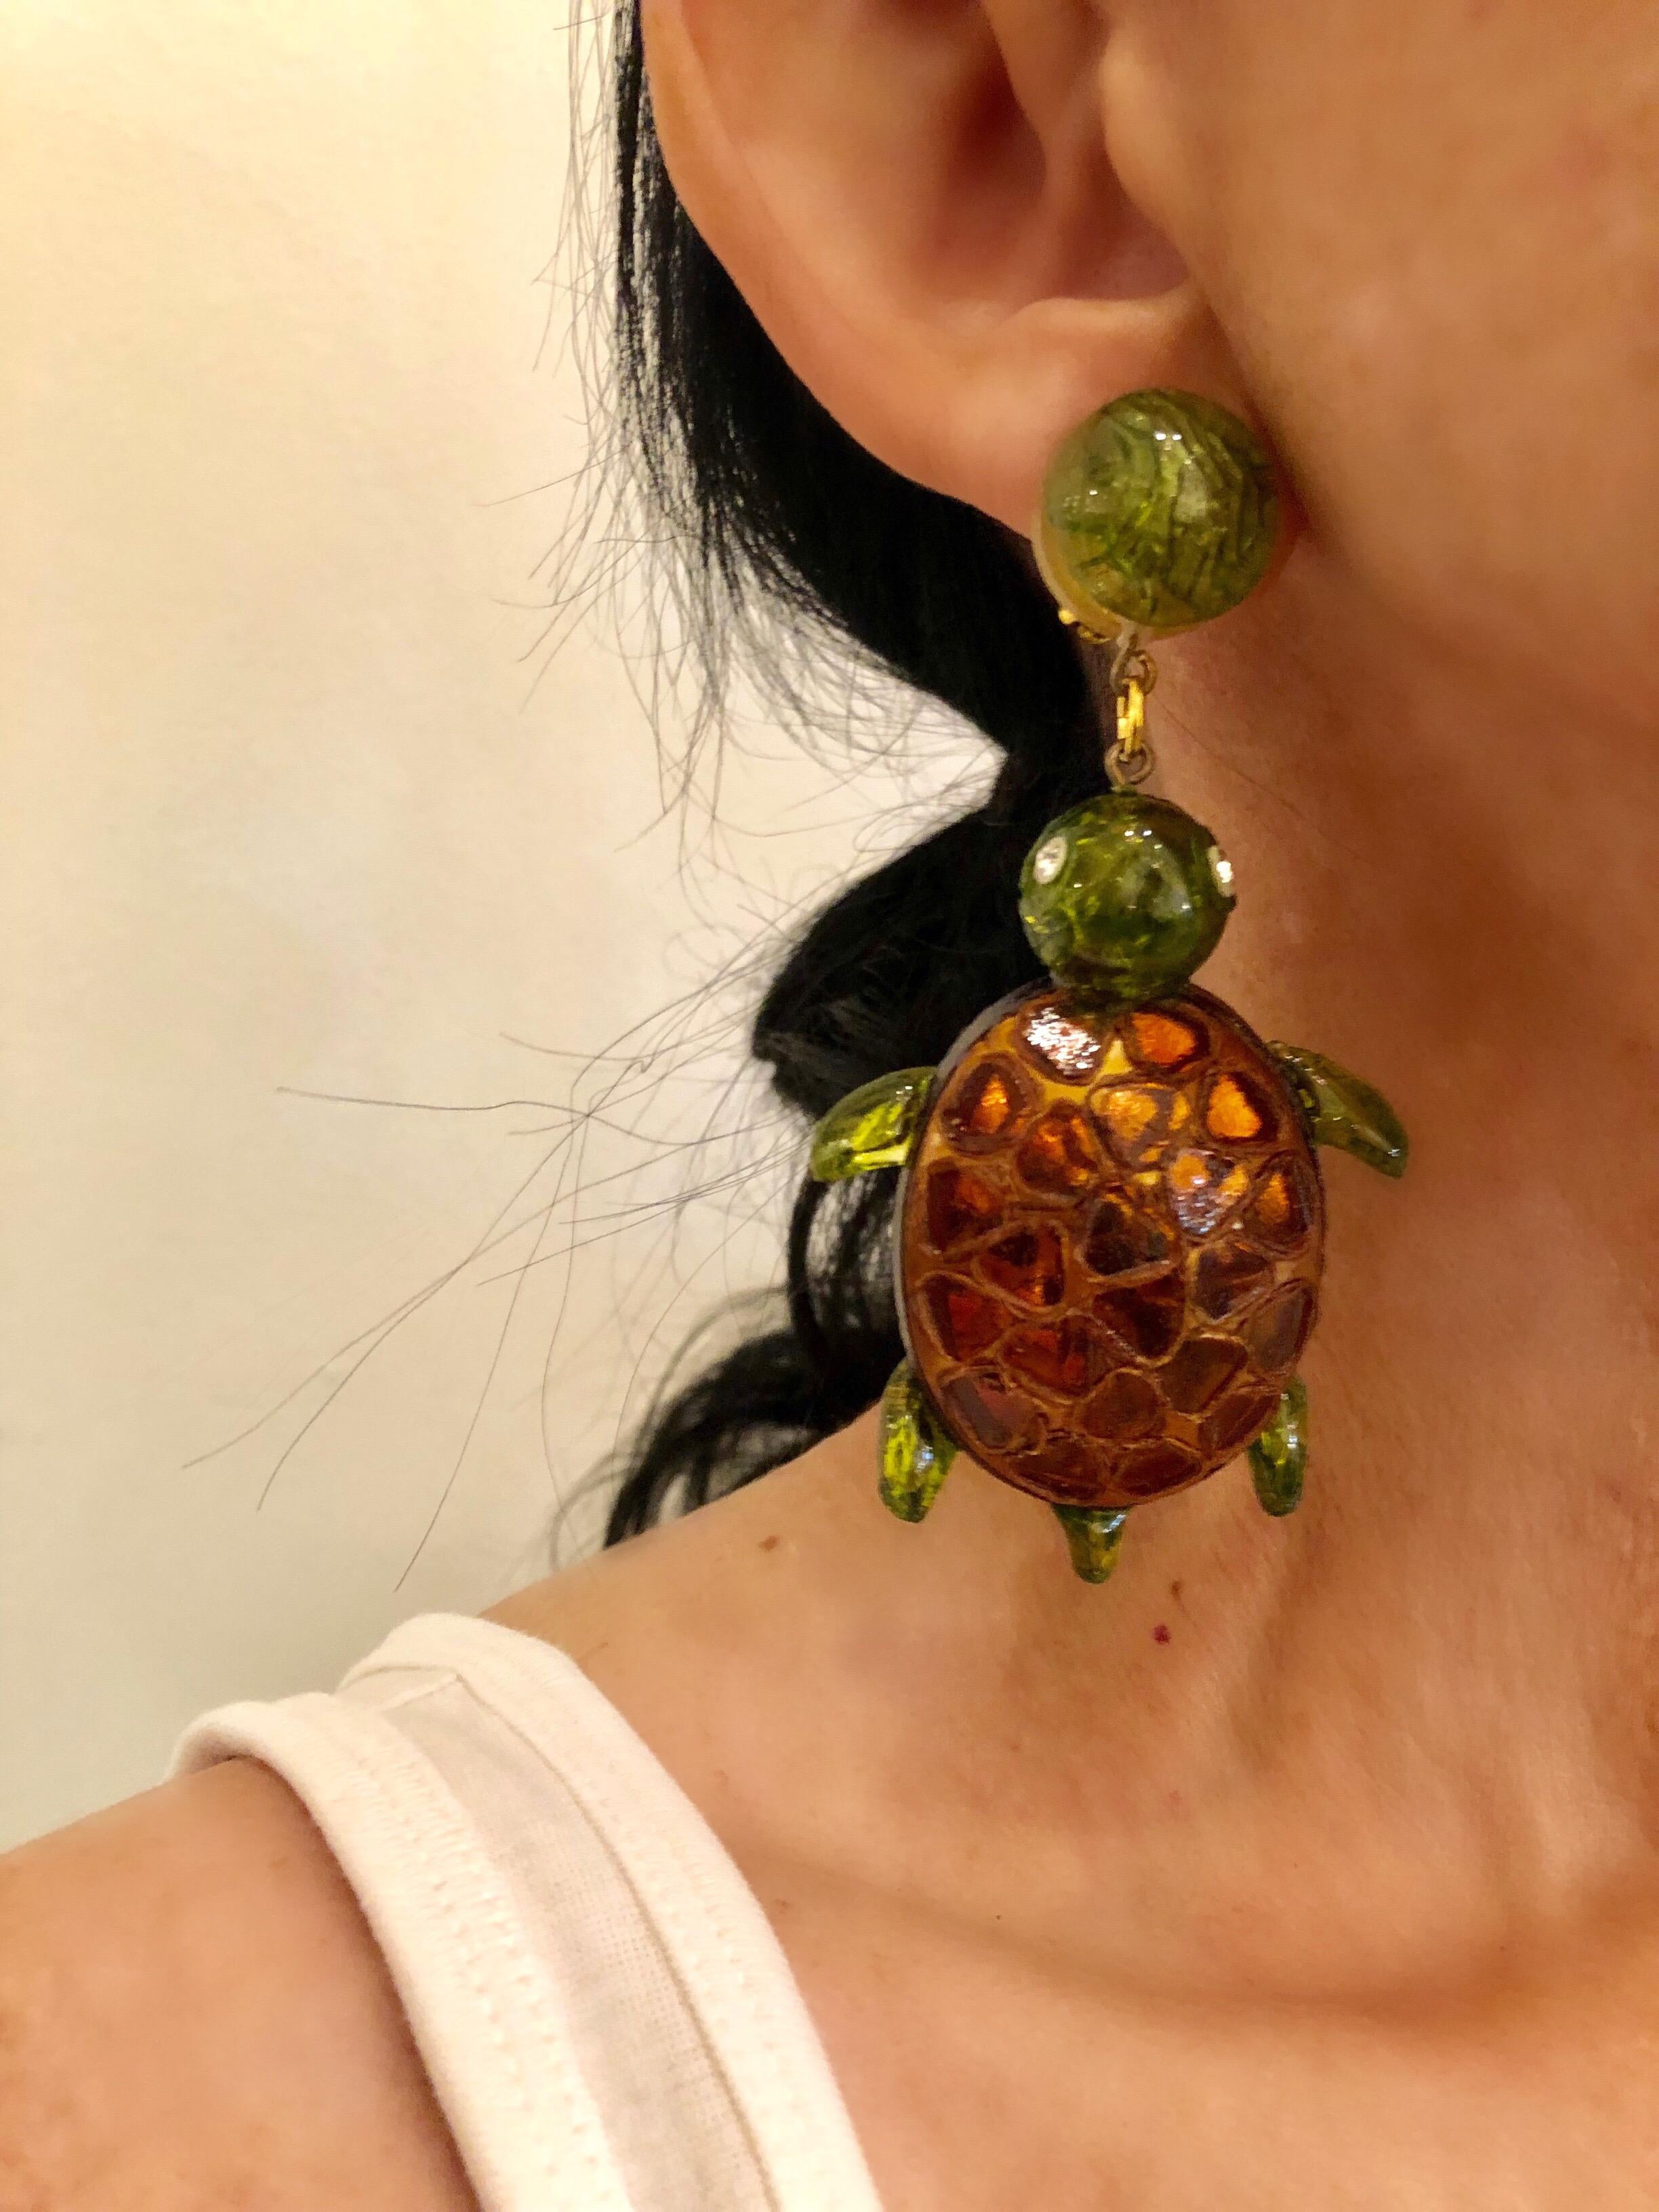 We are pleased to present this unique contemporary artisanal turtle chandelier statement clip-on earrings, handcrafted in Paris France by Cilea Paris. The bold and fashion current earrings are comprised of  enameline (resin and enamel)  and feature